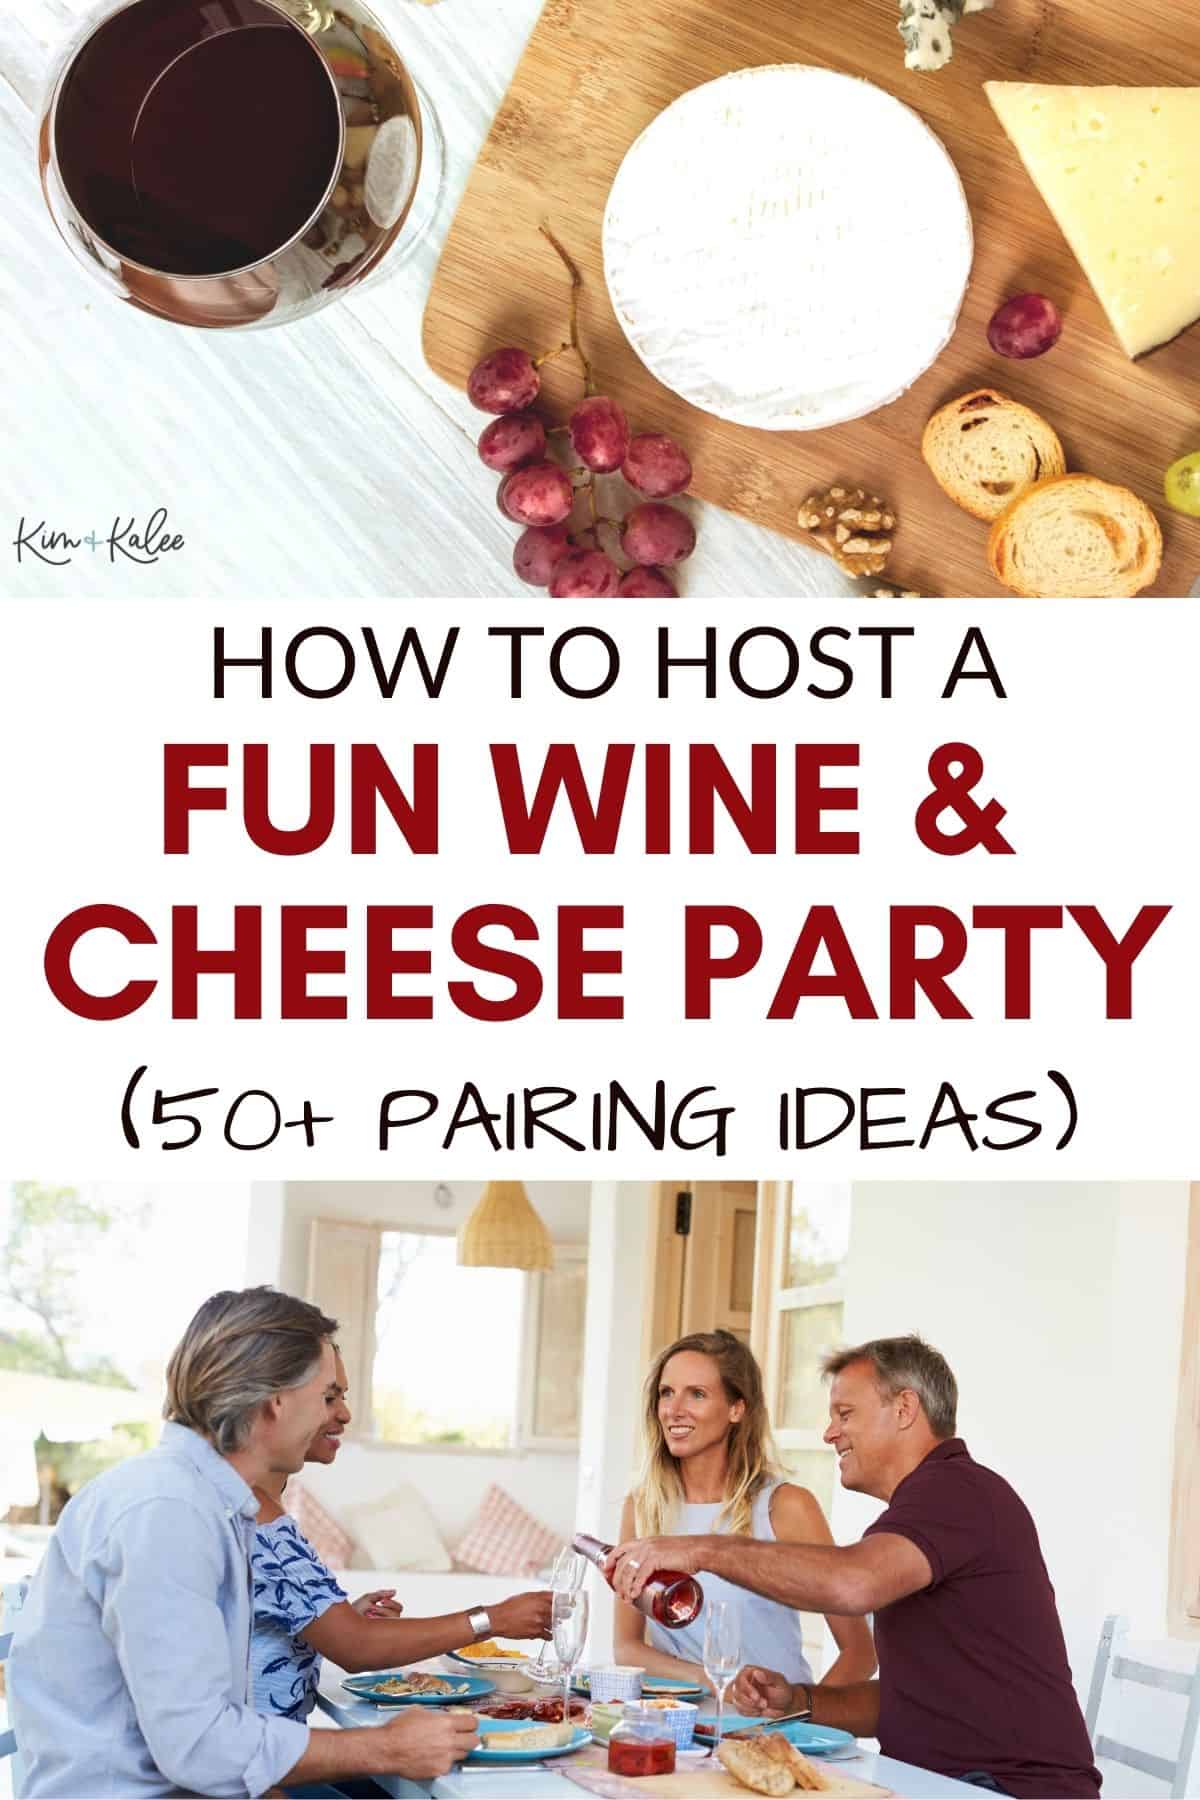 collage of wine, cheese, and 4 friends getting together -- the text overlay "how to host a fun wine and cheese party with 50+ pairing ideas)